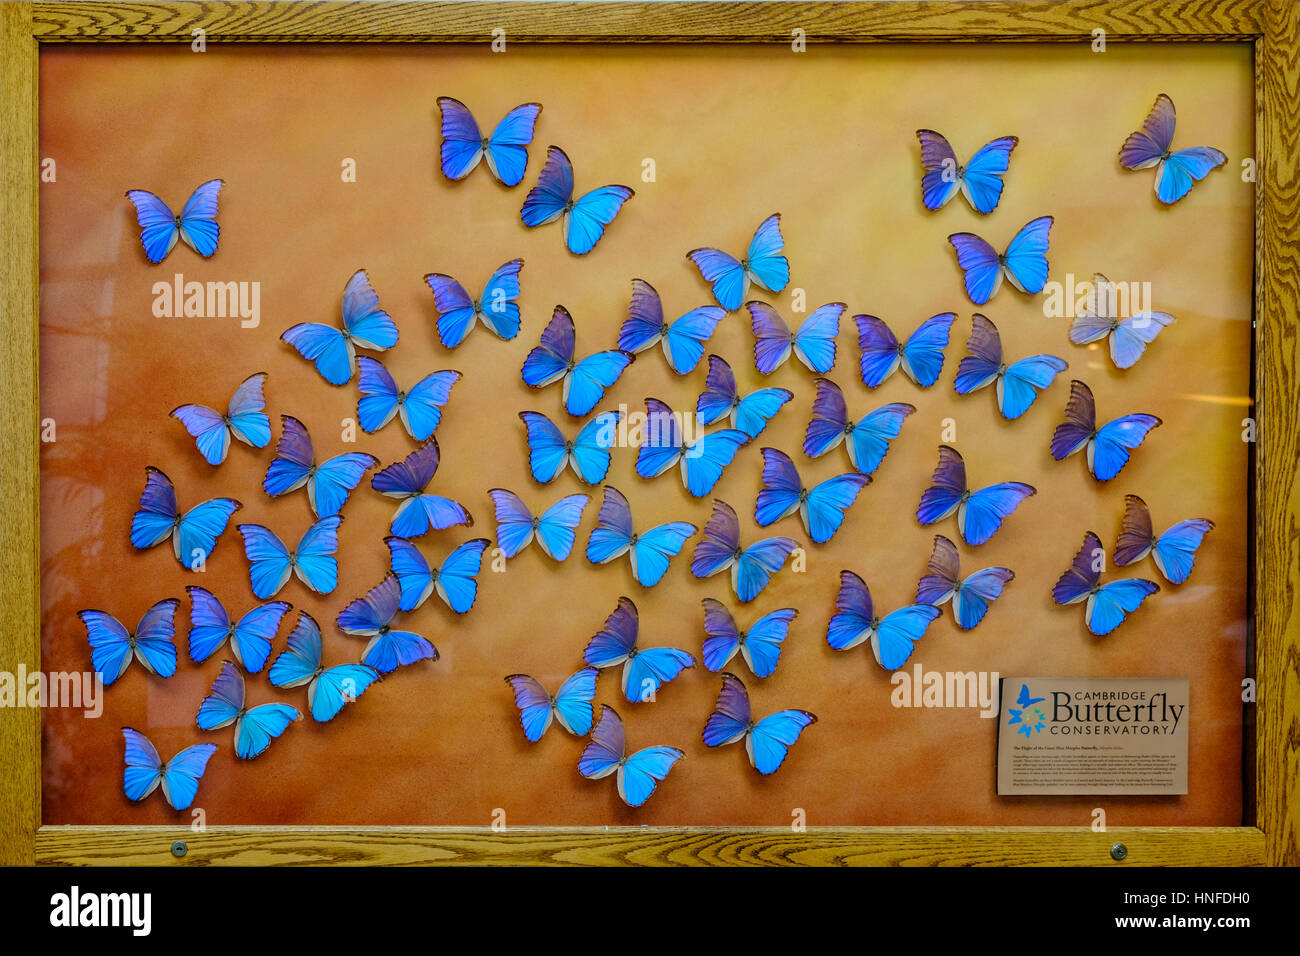 Framed butterflies, Giant Blue Morpho (Morpho didius) hanging on the wall at the entrance of the Cambridge Butterfly Conservatory, Ontario, Canada. Stock Photo